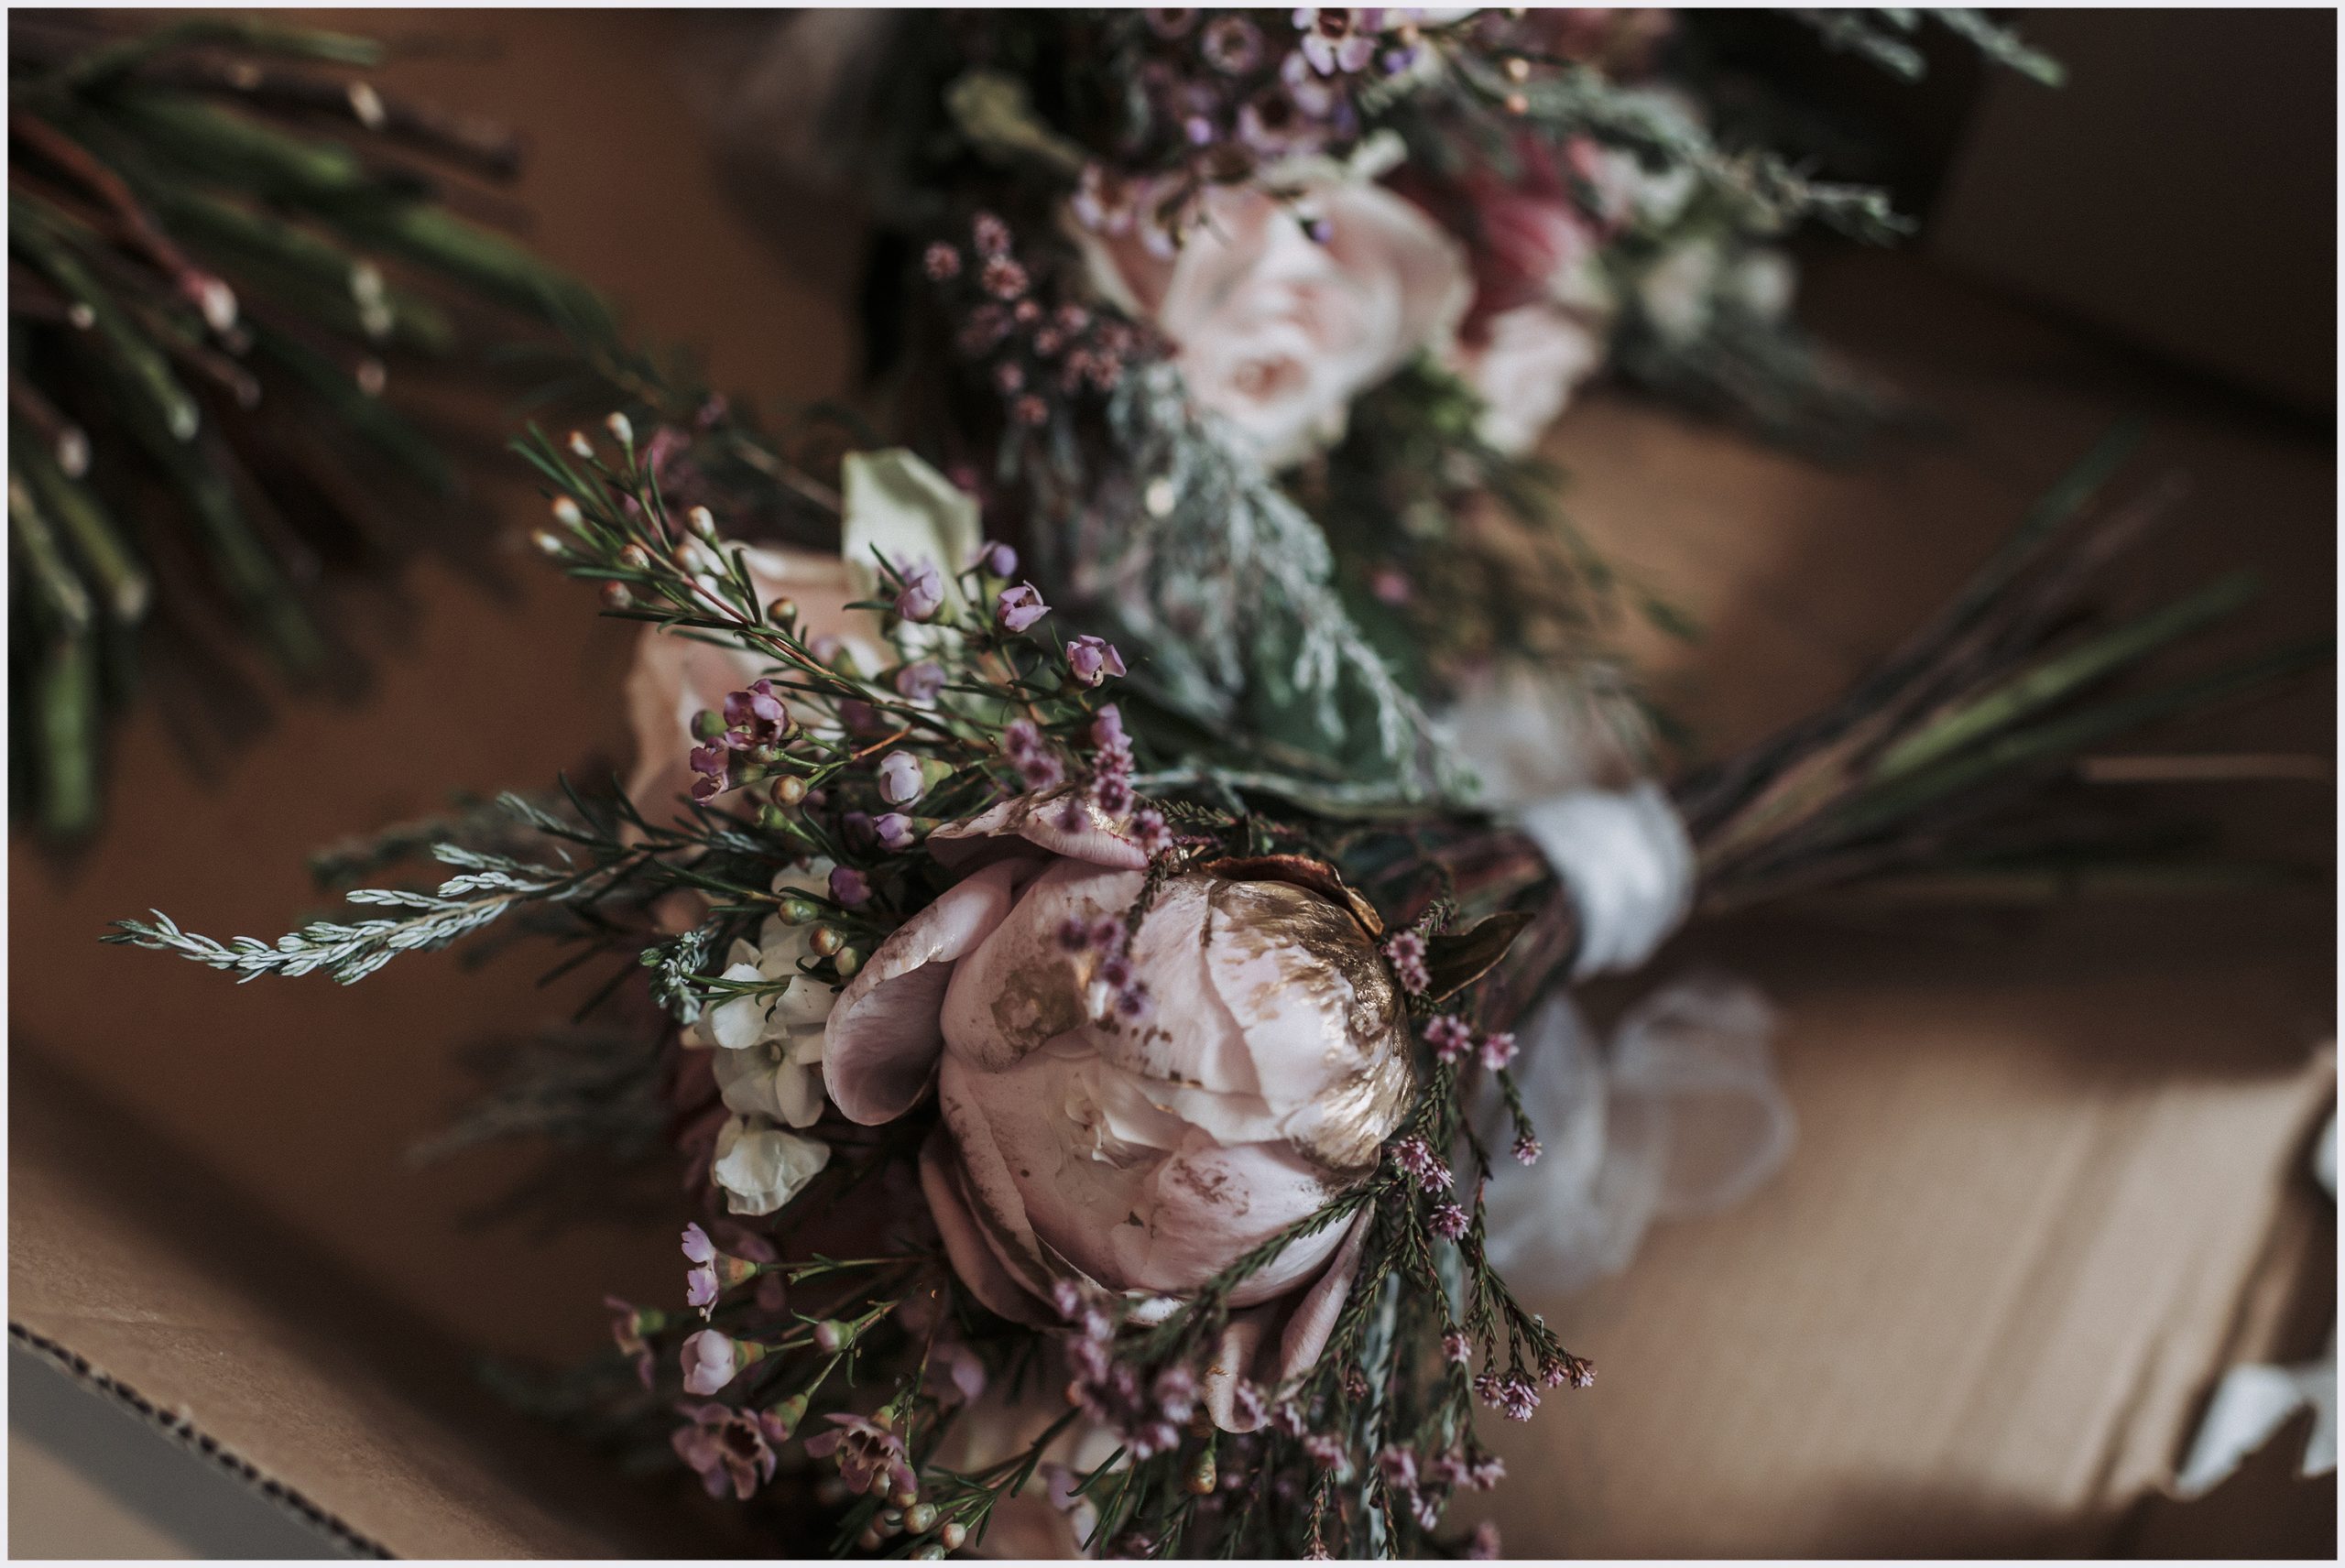 A bridesmaid's beautiful bouquet.  Image captured by Helena Jayne Photography, a photographer based in North Wales